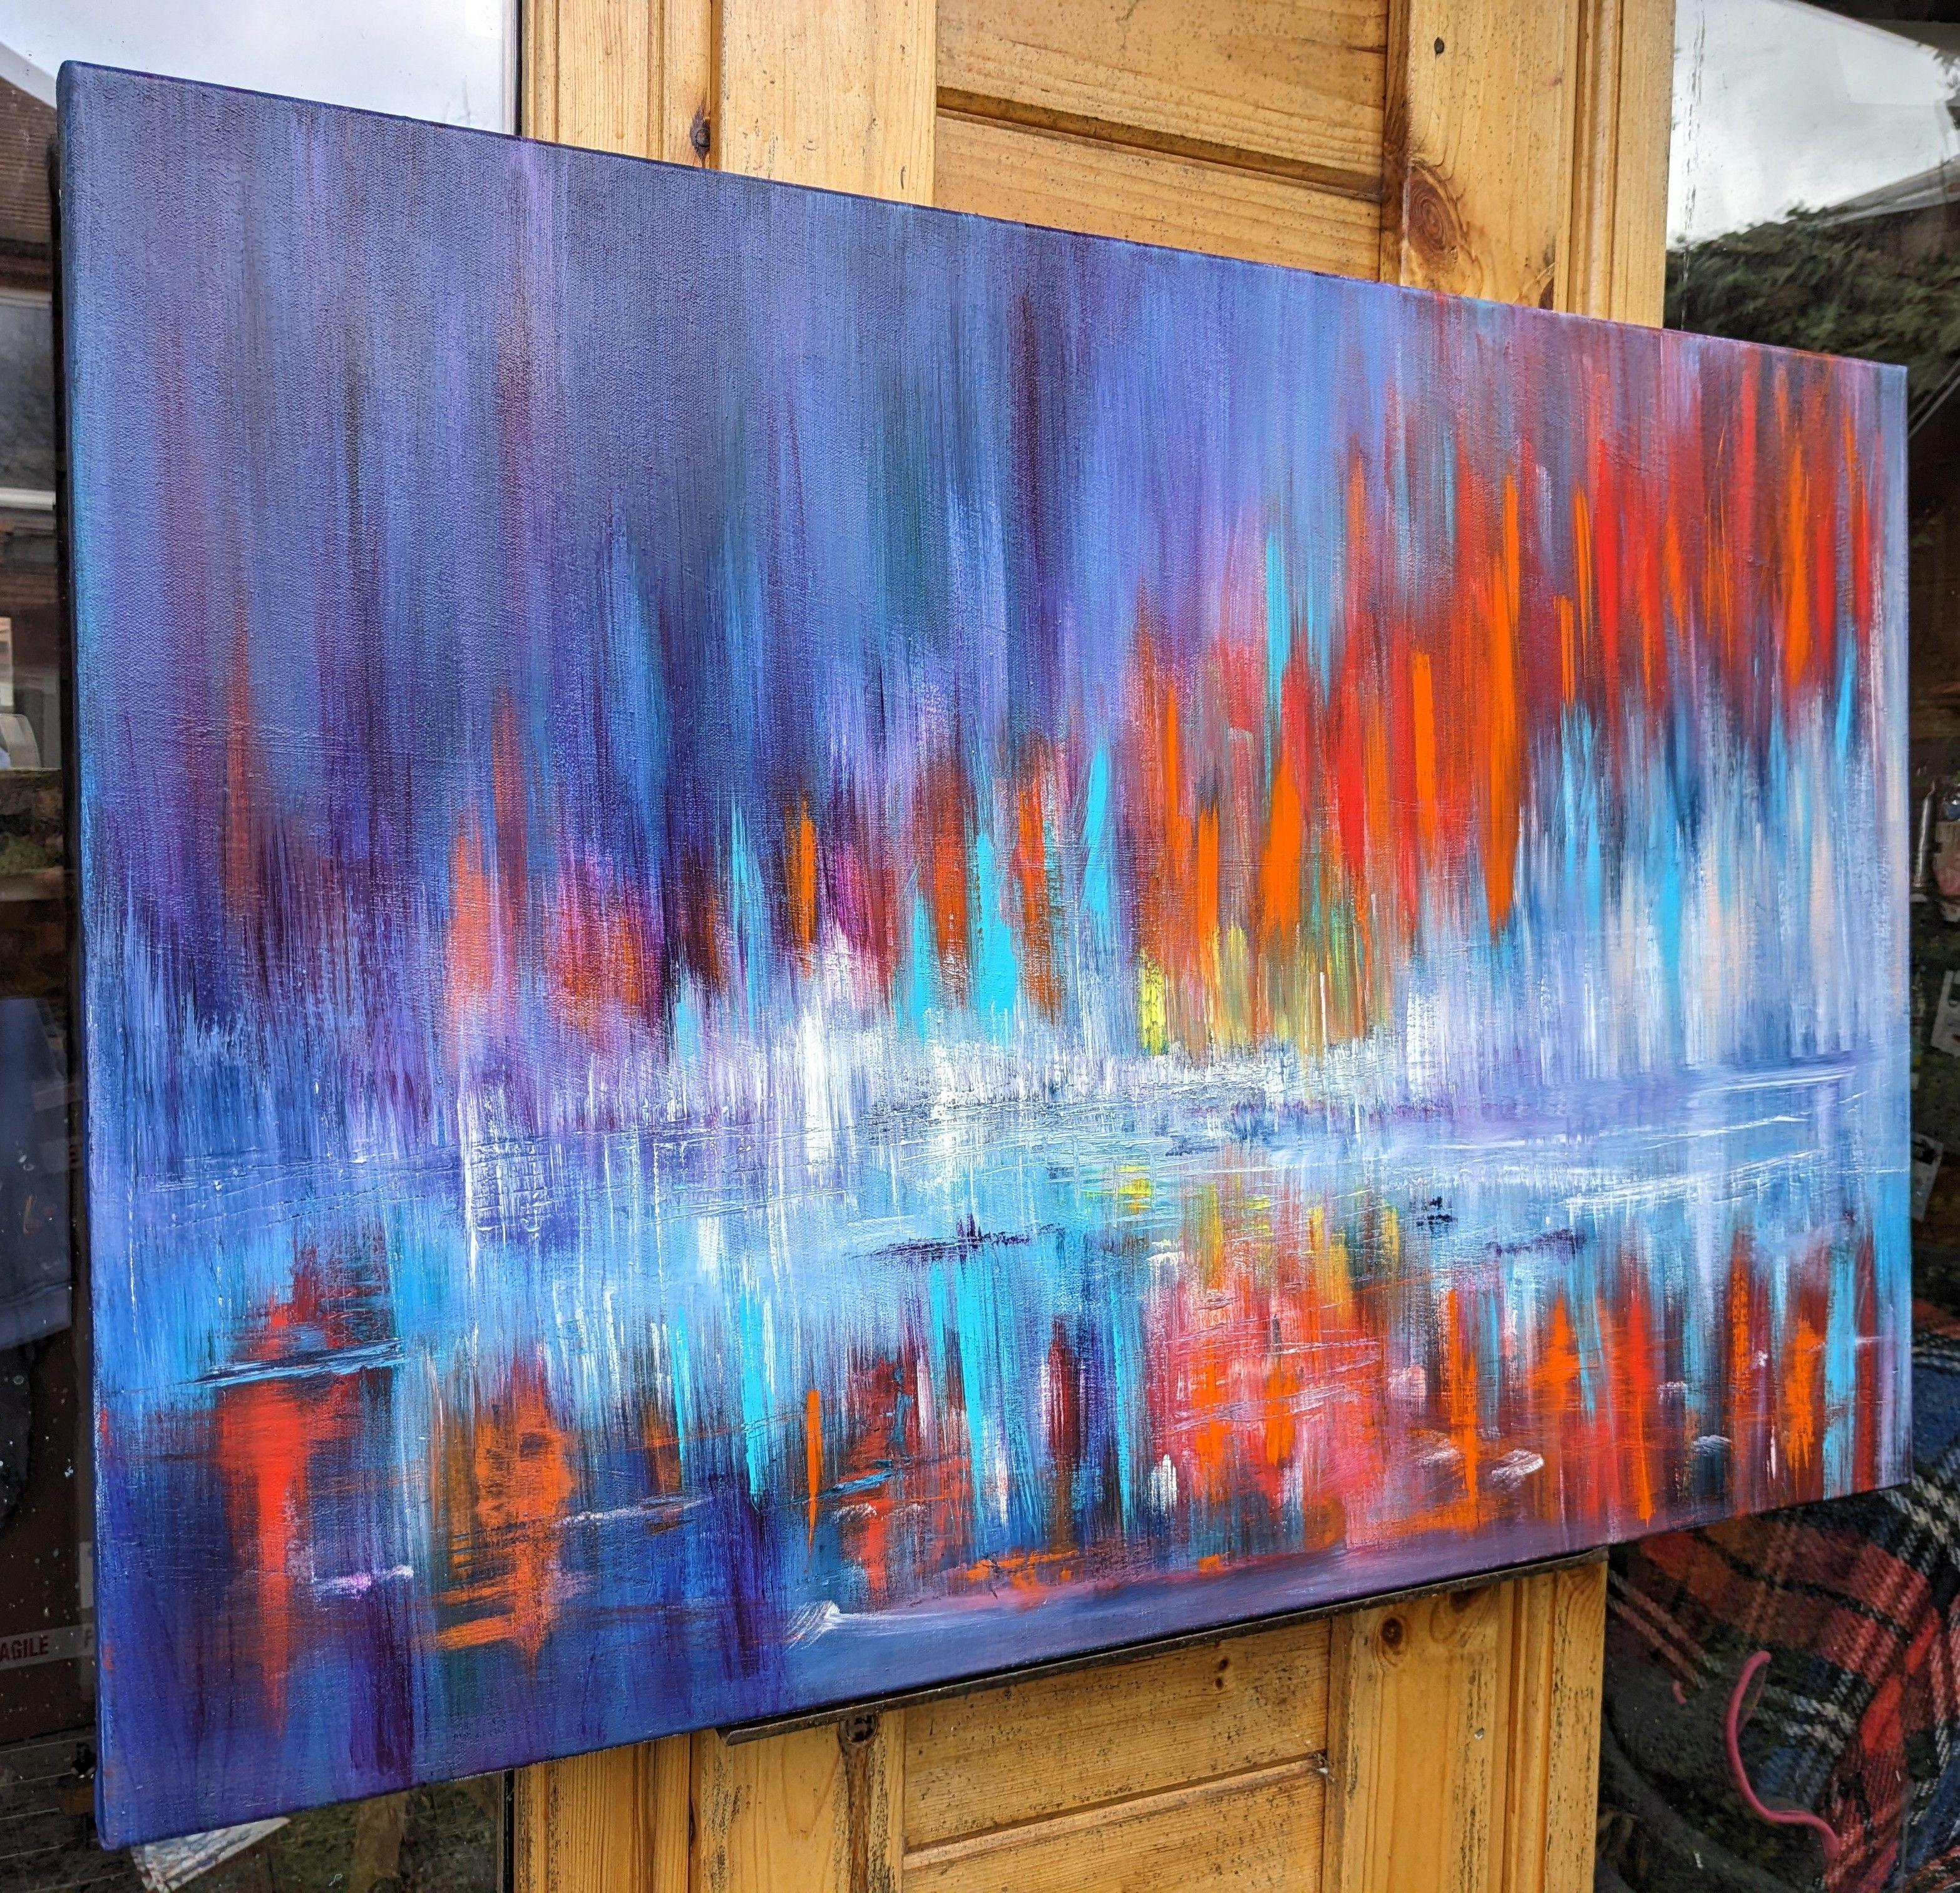 This piece is intense and vibrant, and painting this was a real emotional sanctuary for me. The wild and rich crimson and orange hues blend well with the flowing teals and blues. A thought provoking vibrant and emotional piece. Reflective and